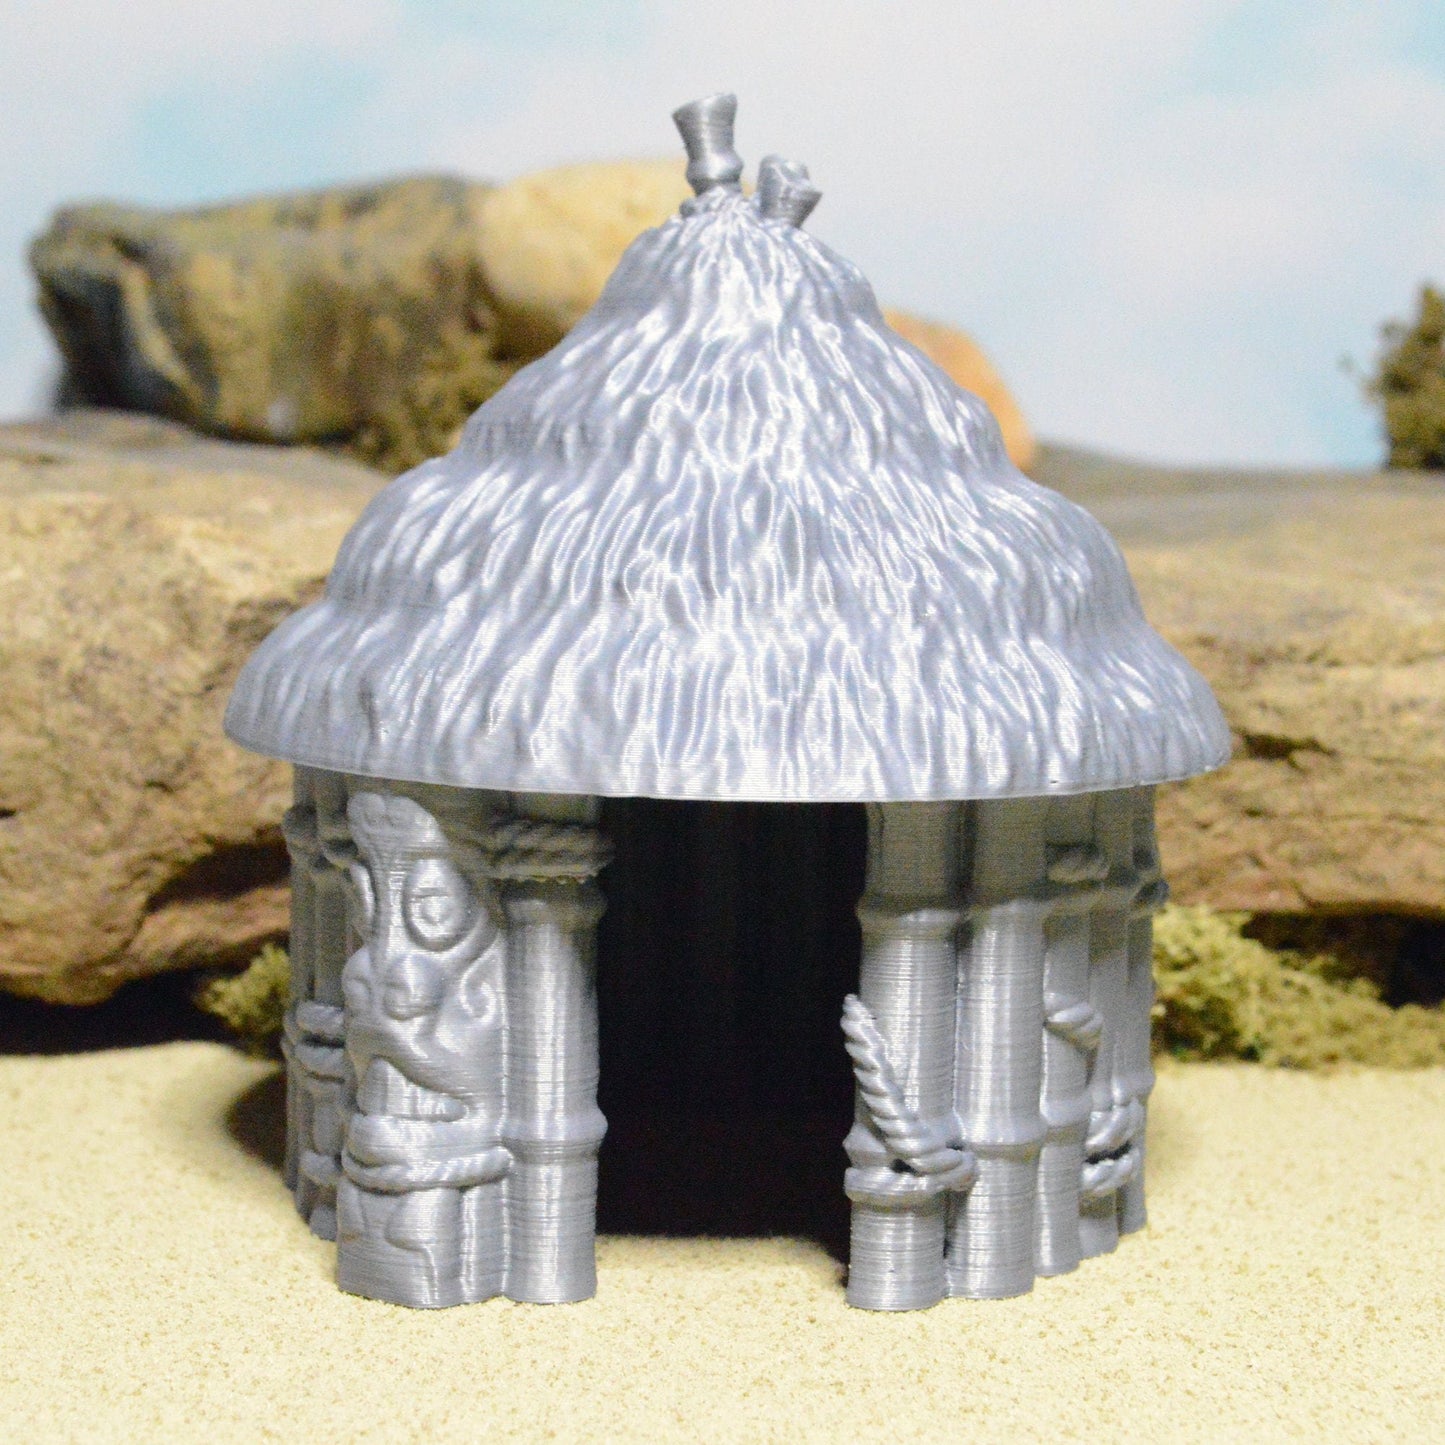 Bamboo Hut Small 28mm 32mm for D&D Terrain, DnD Pathfinder Tribal Coastal Village, Depths of Savage Atoll